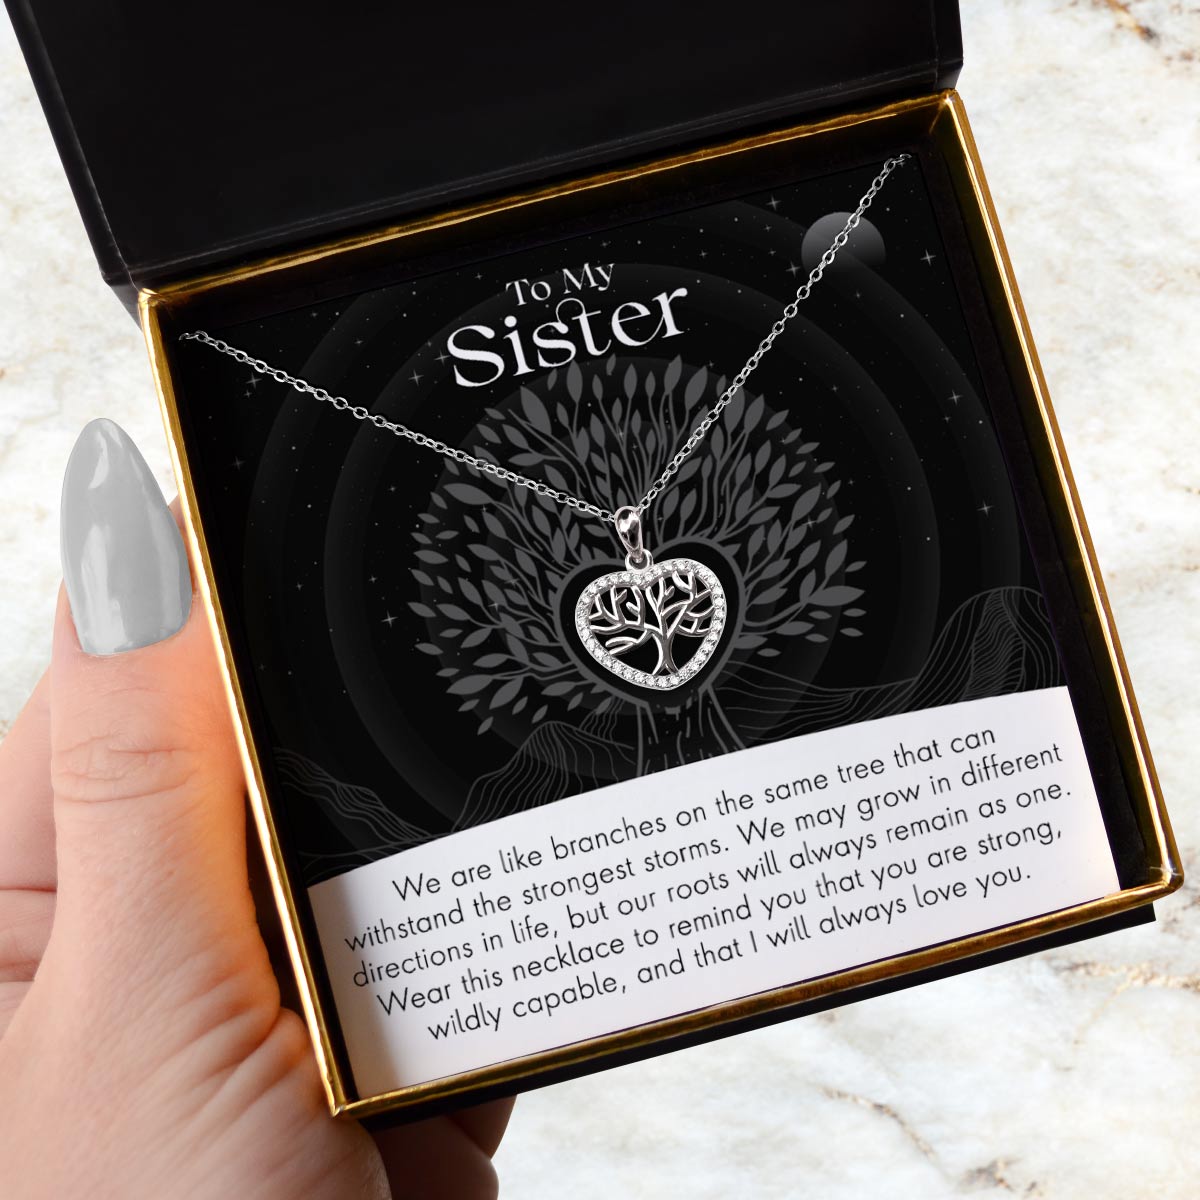 To My Sister, Strong Roots - Tree of Life Mini Heart Pendant Necklace Gift Set